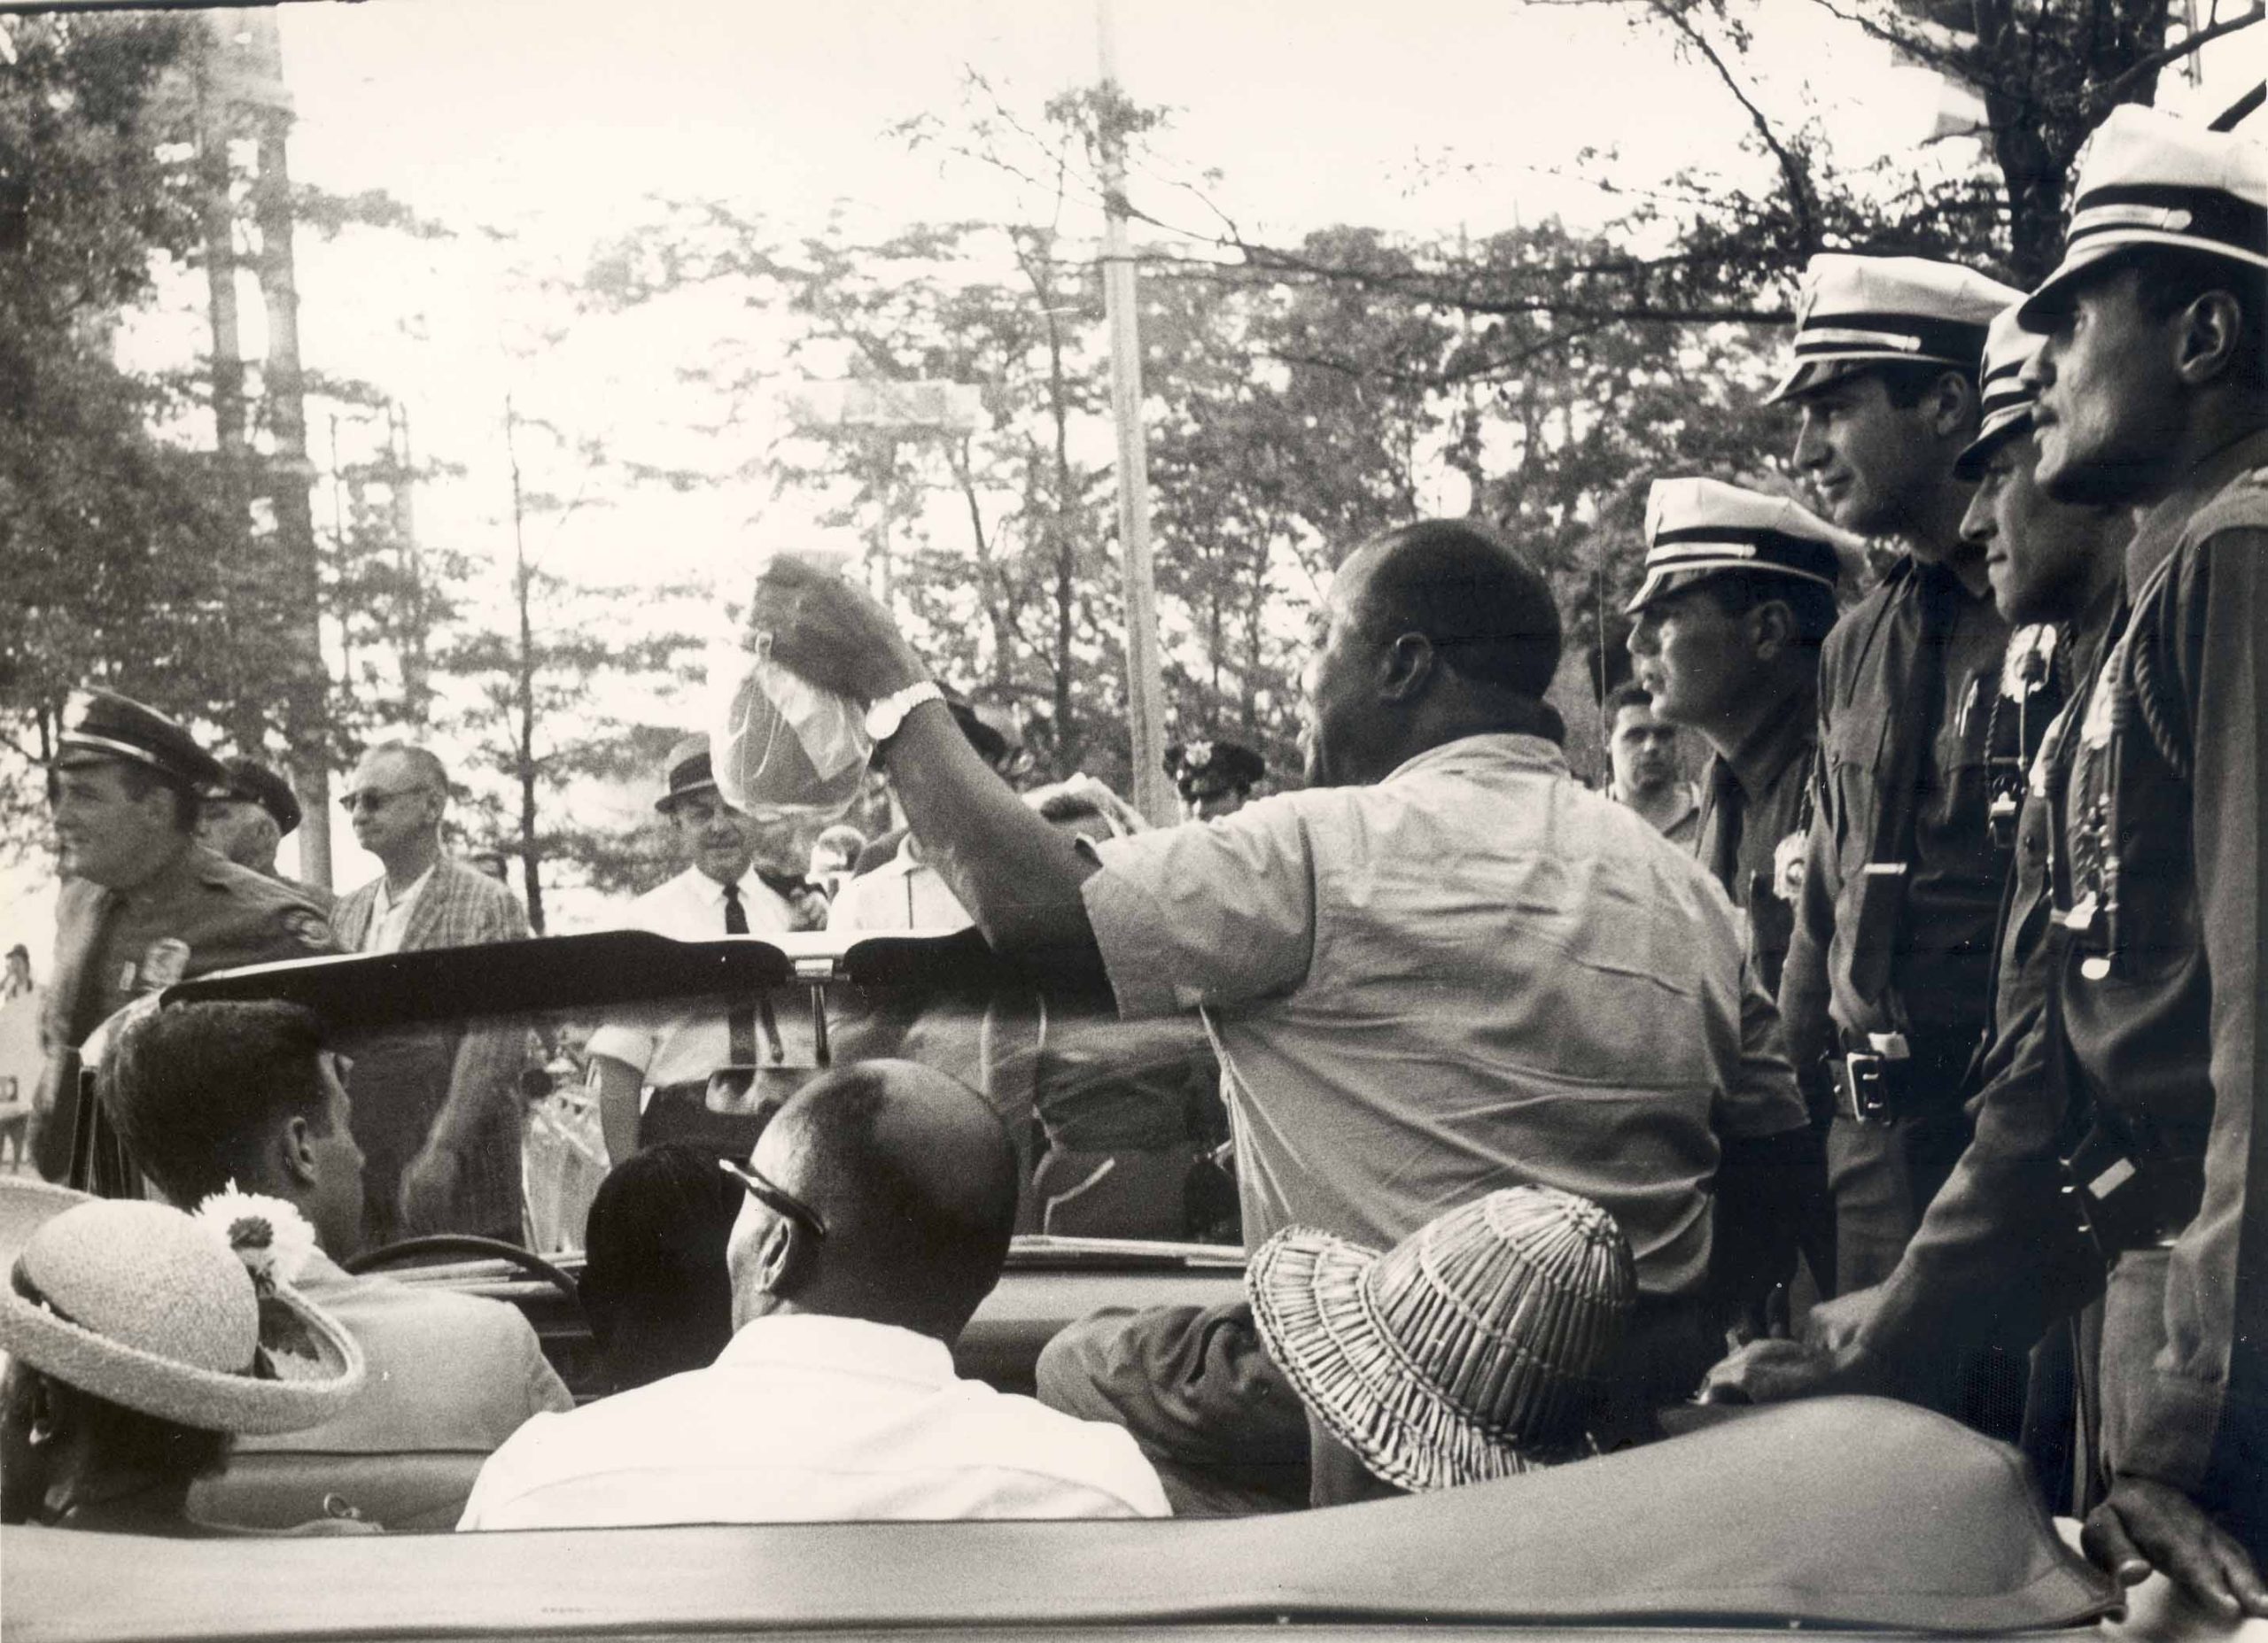 A black and white photograph of Louis Armstrong sitting up in a parked convertible filled with seated passengers. His back is turned away to wave to a crowd. Lined up against the convertible is a row of police officers.